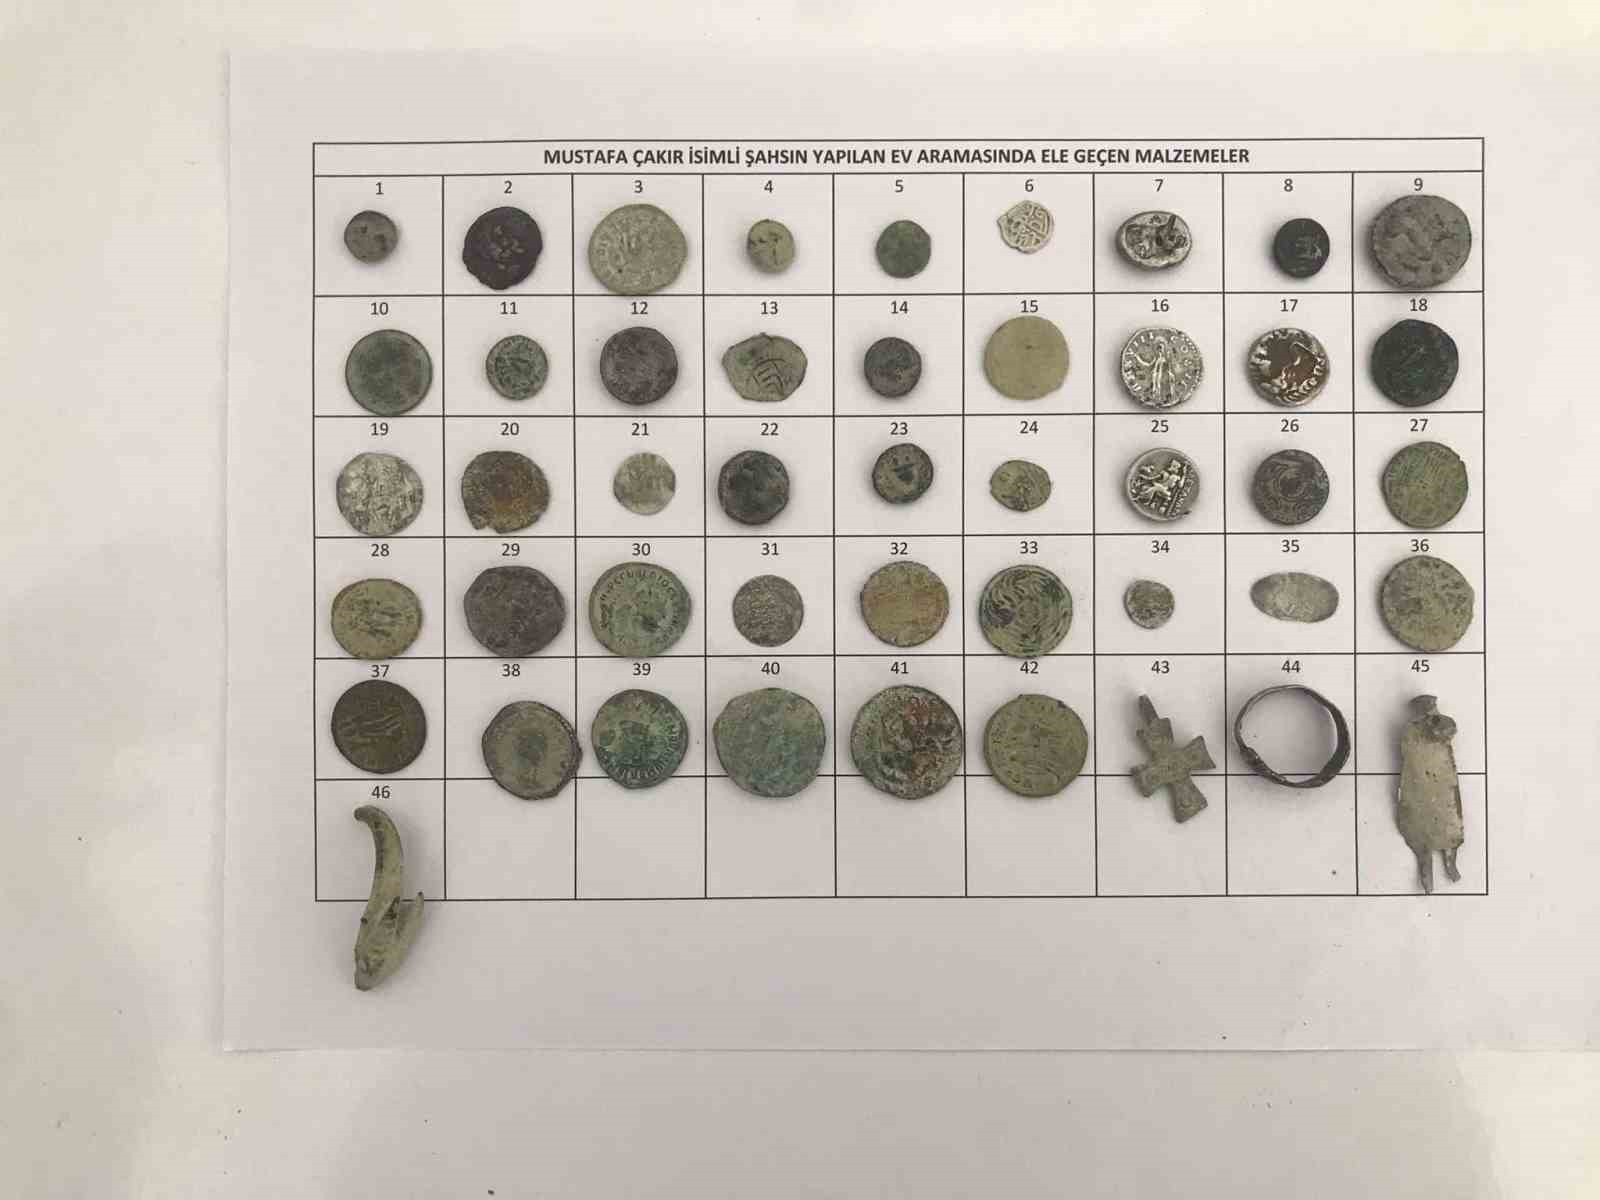 Historic artifacts seized in Mersin